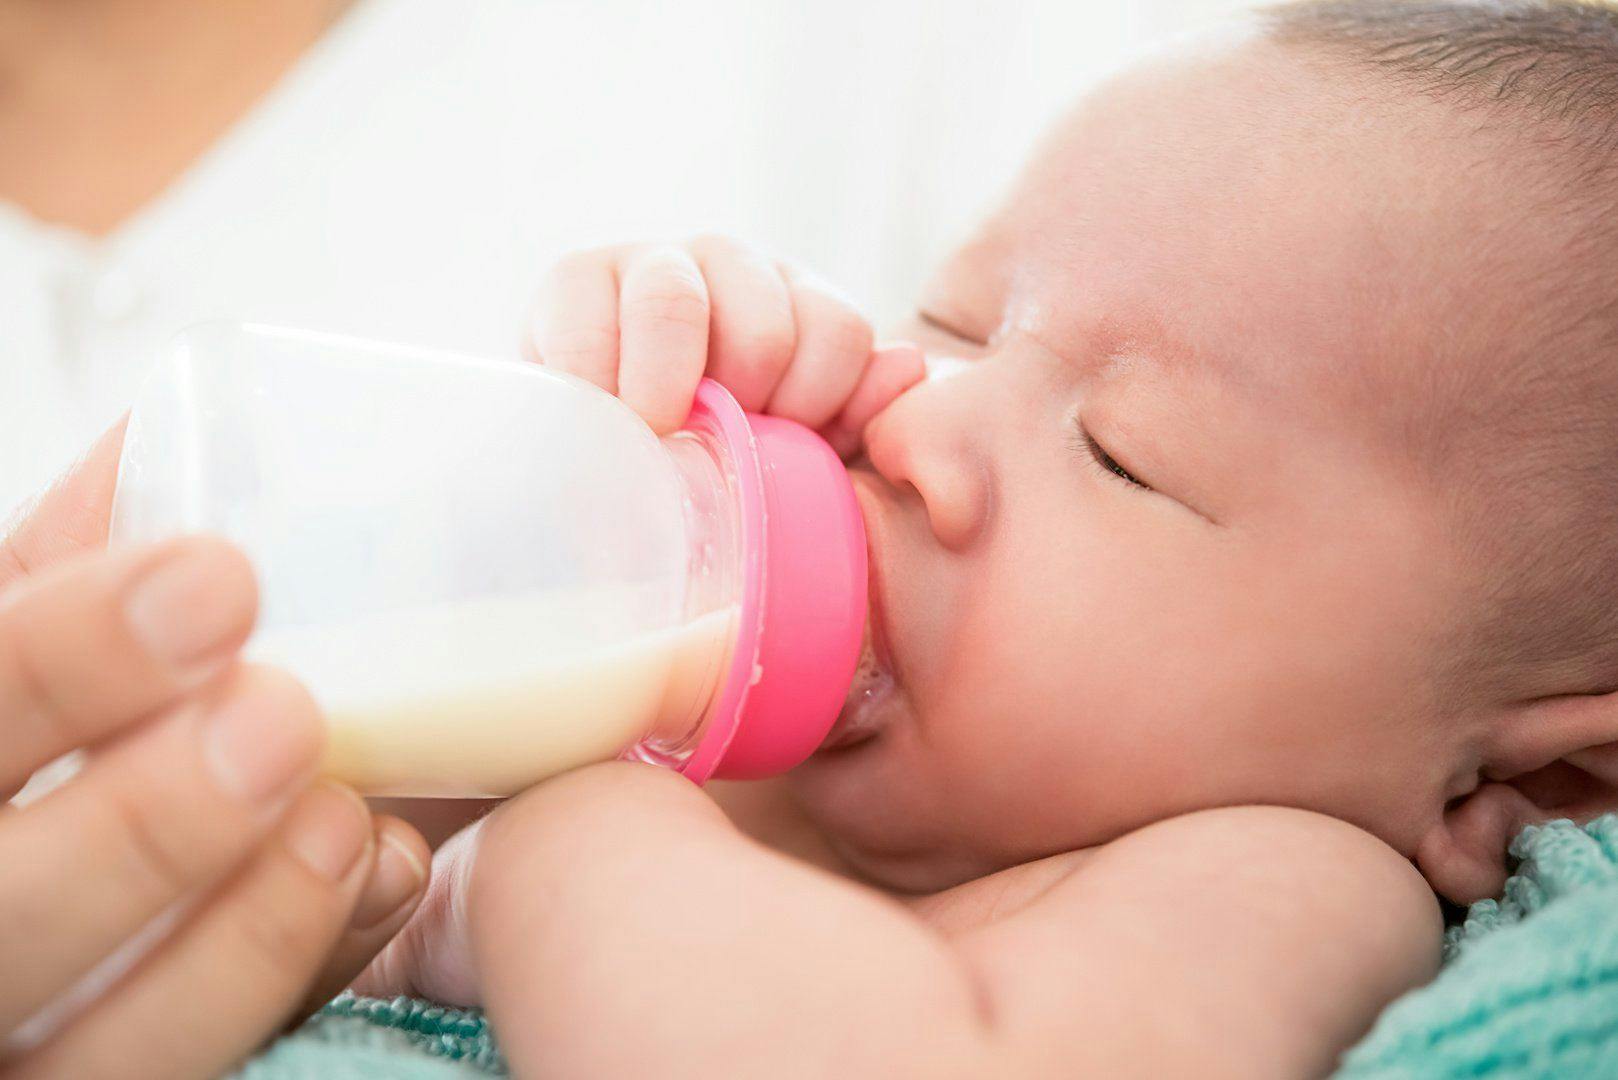 Impact of milk cereal drink on future obesity risk